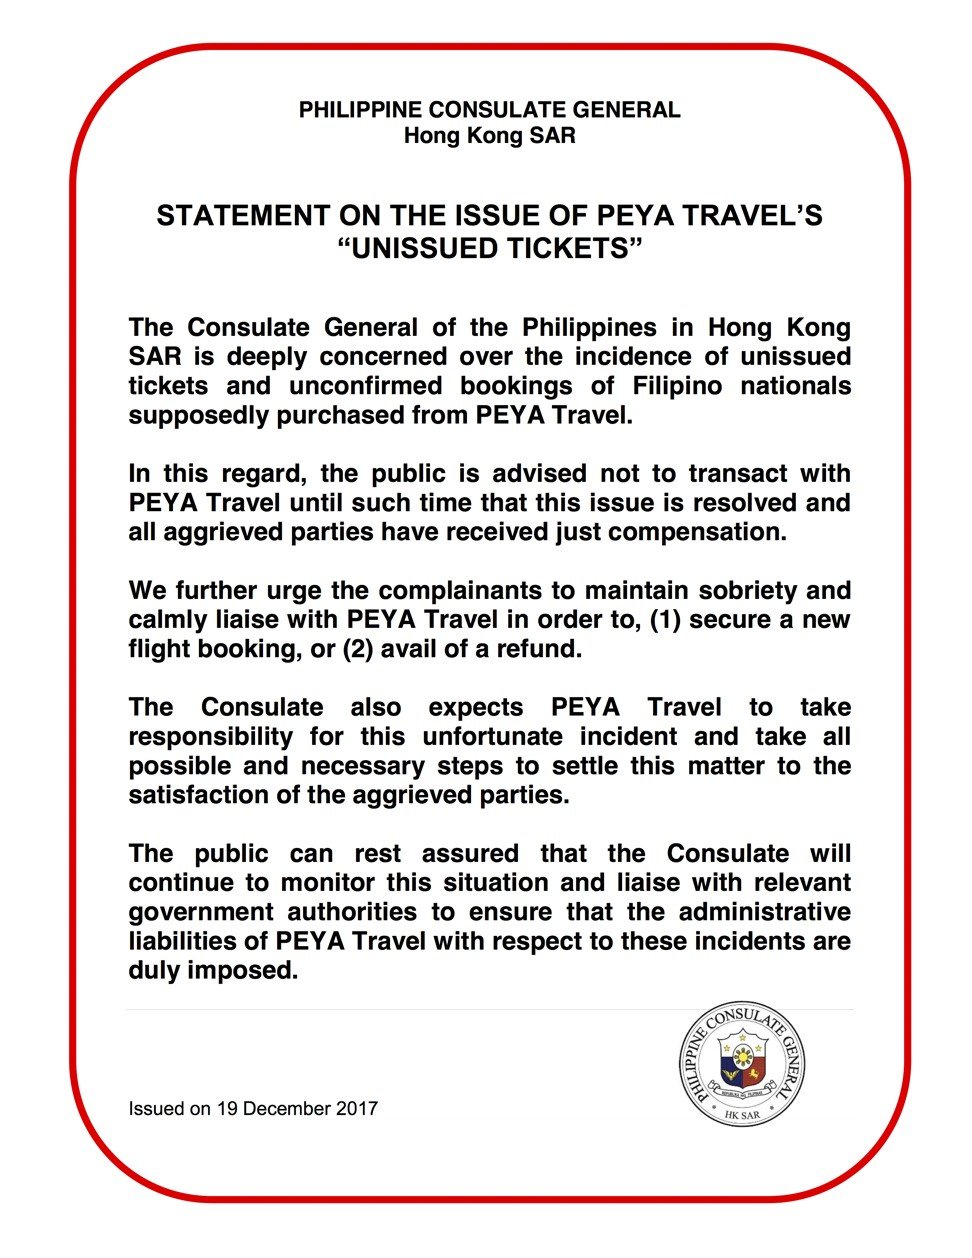 A statement from Philippine Consulate General on the issue of Peya Travel's unissued tickets. Photo: HANDOUT